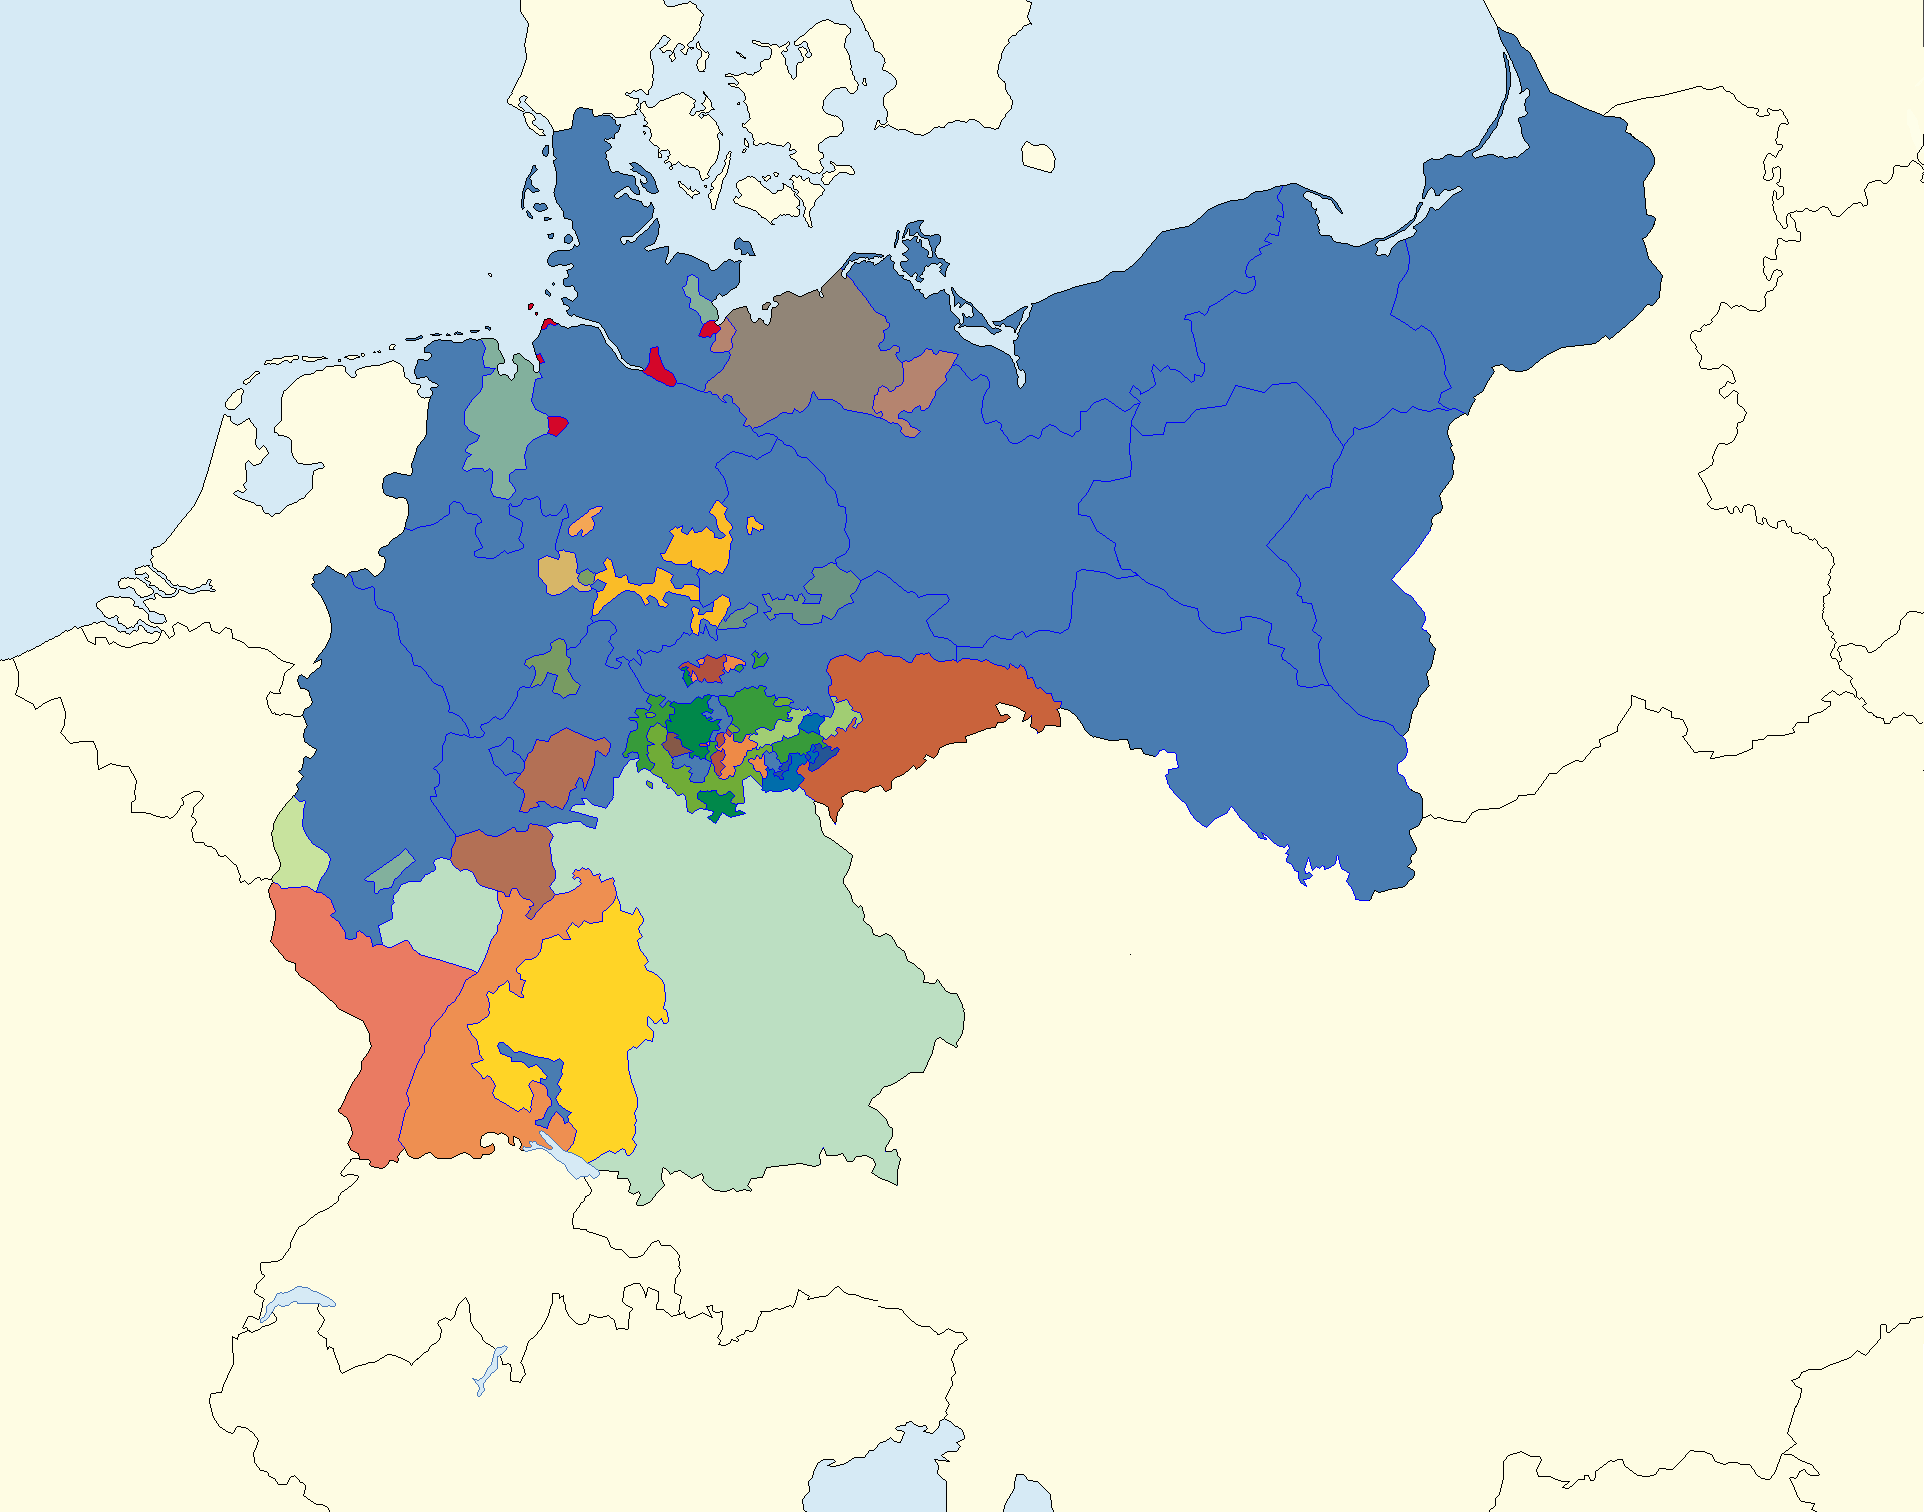 Germany Map 1945